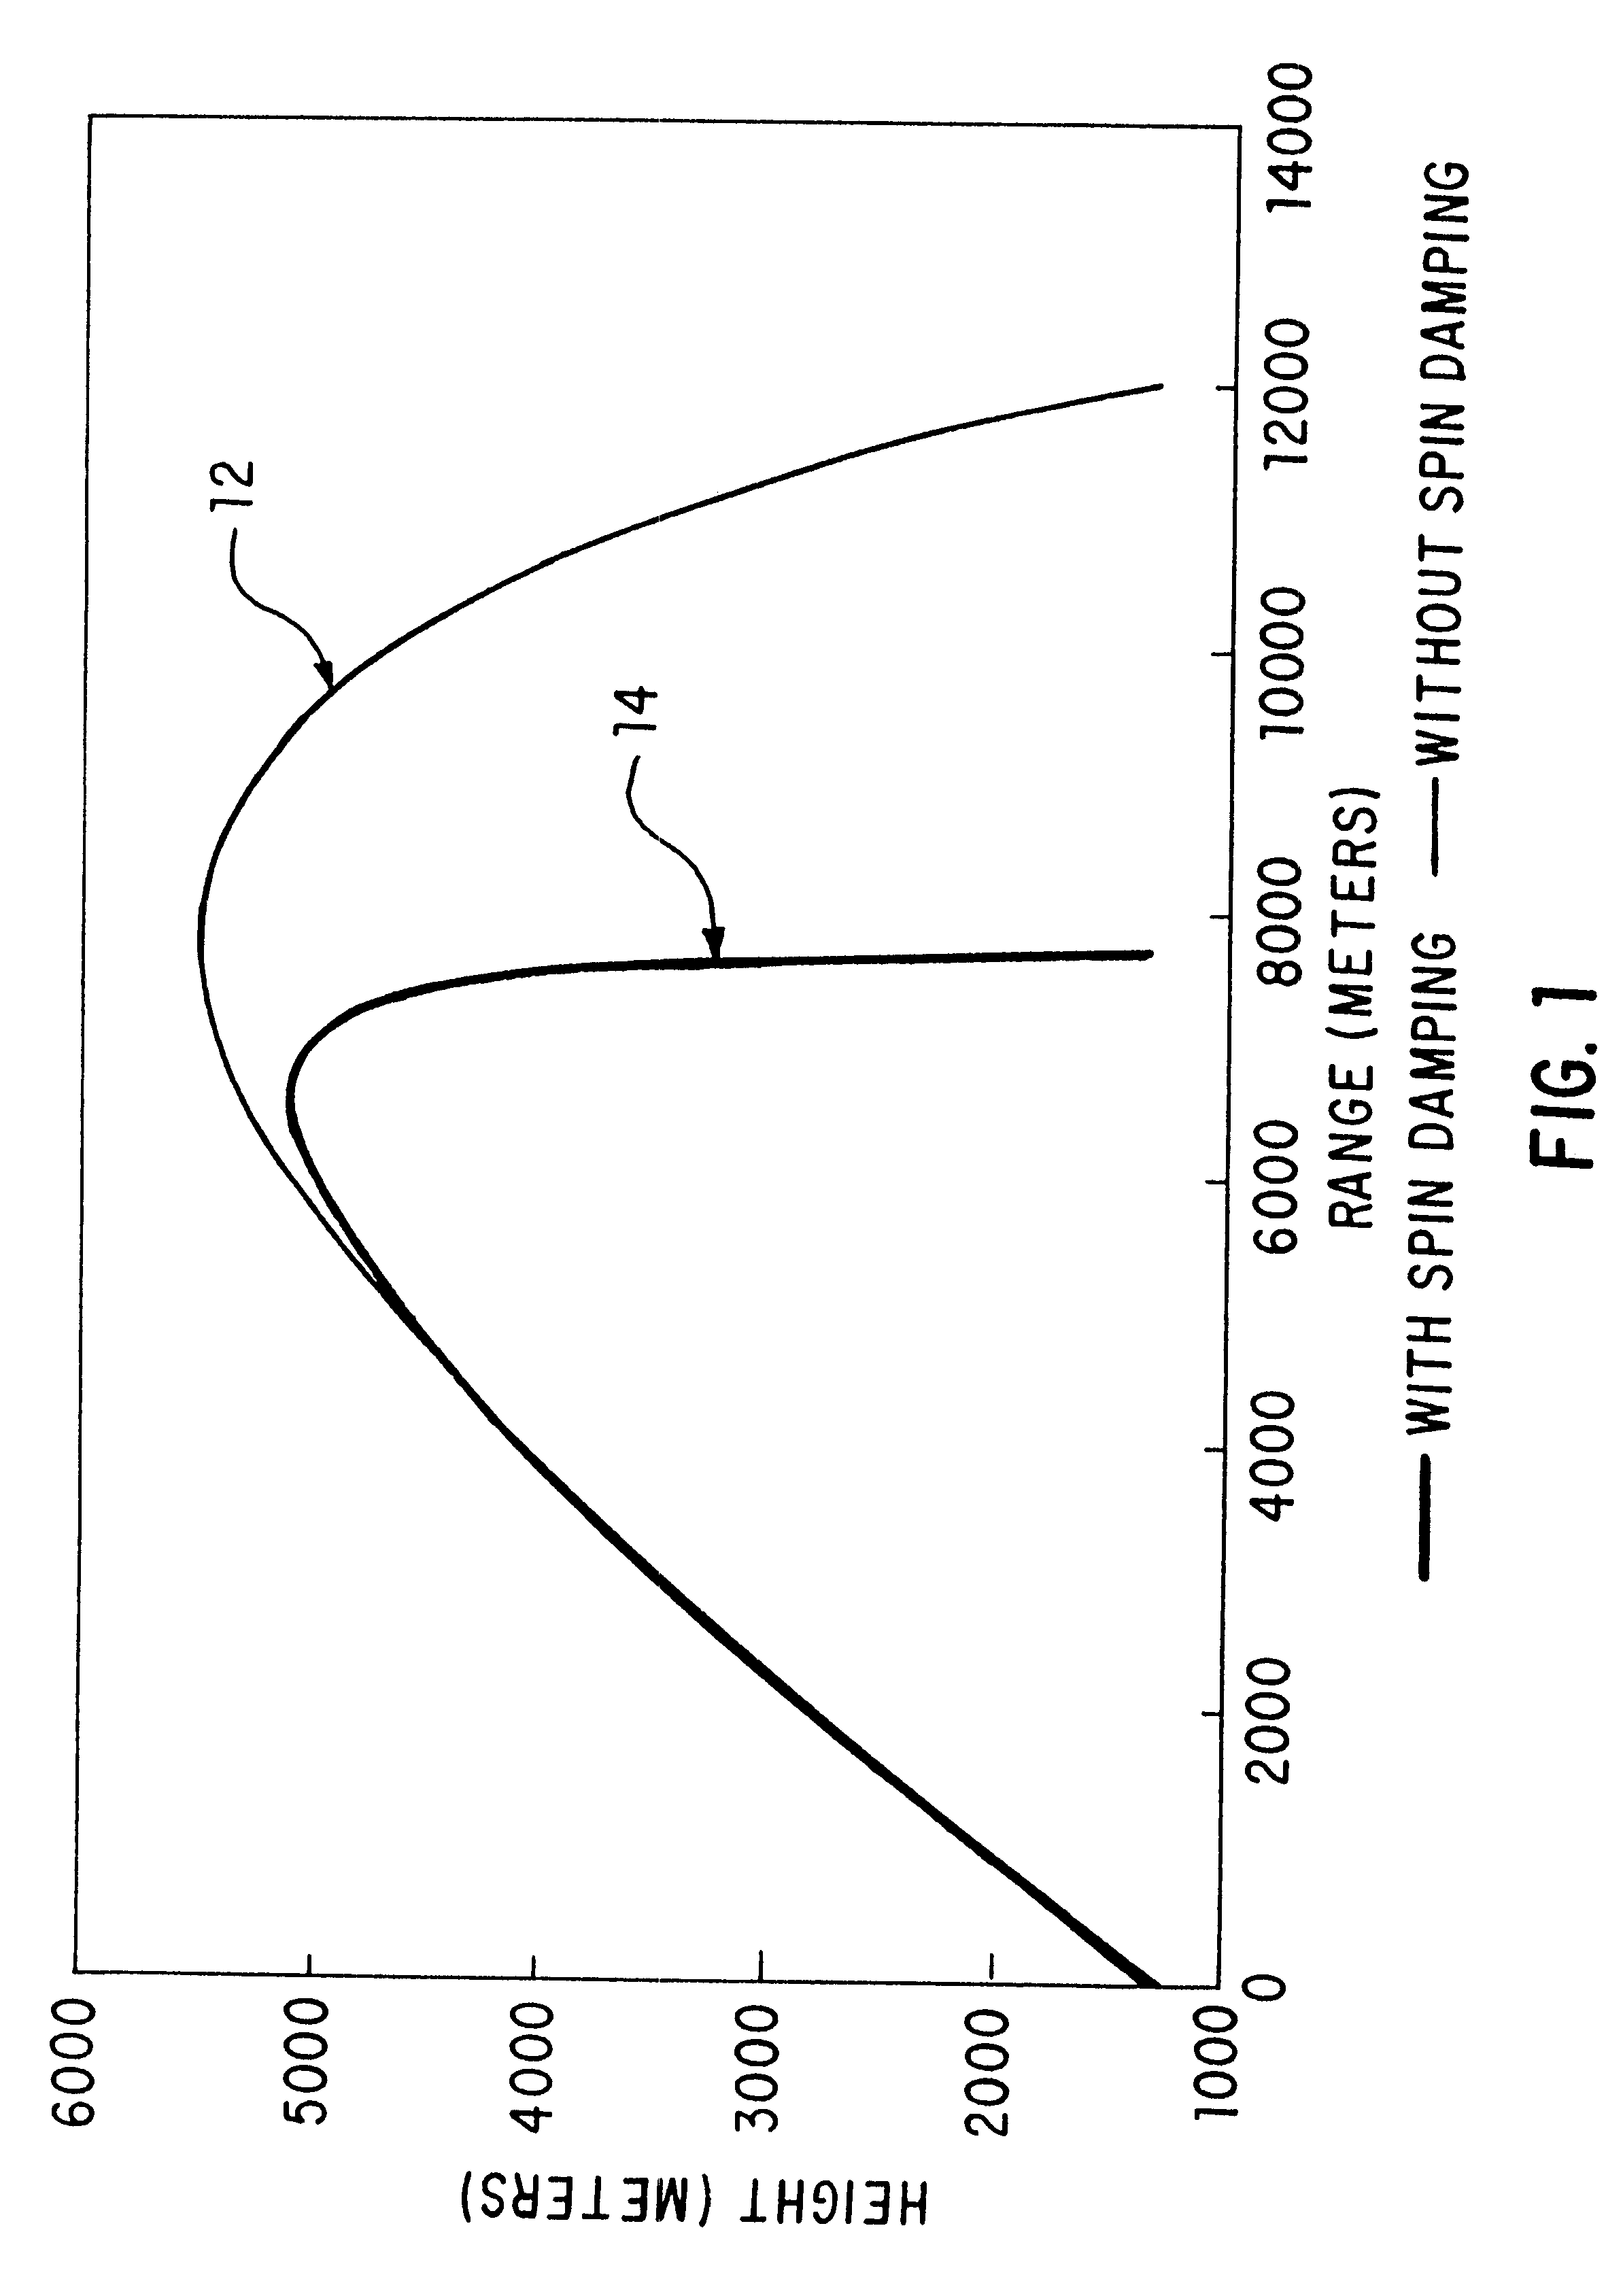 Ranged limited projectile using augmented roll damping